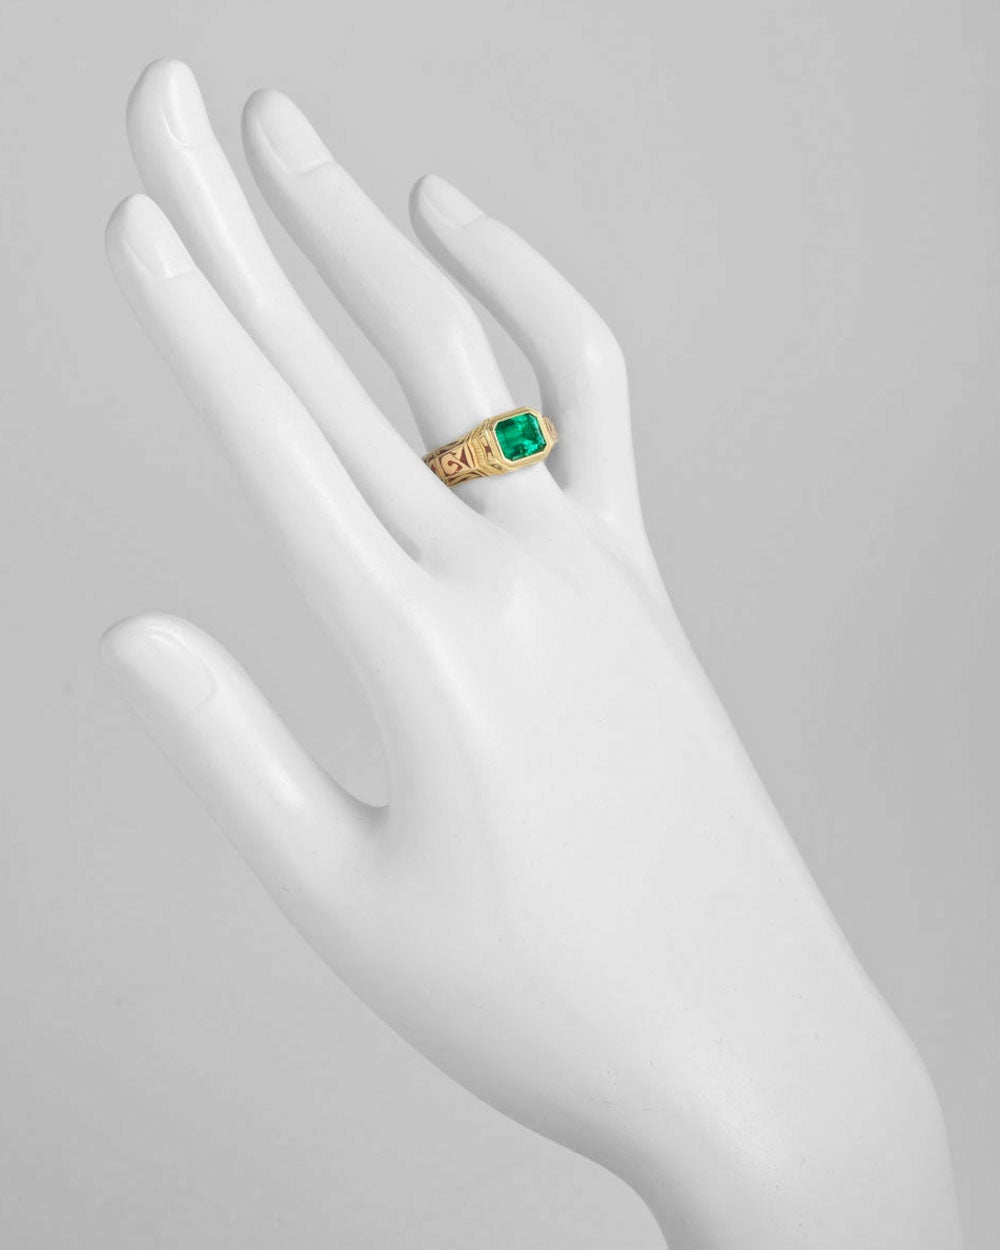 Emerald dress ring, showcasing an emerald-cut Colombian emerald weighing approximately 1.50 carats, bezel-set in 18k yellow gold, the mounting decorated with elegantly patterned reddish-brown enamel, signed Otto Jakob. Size 6.5.